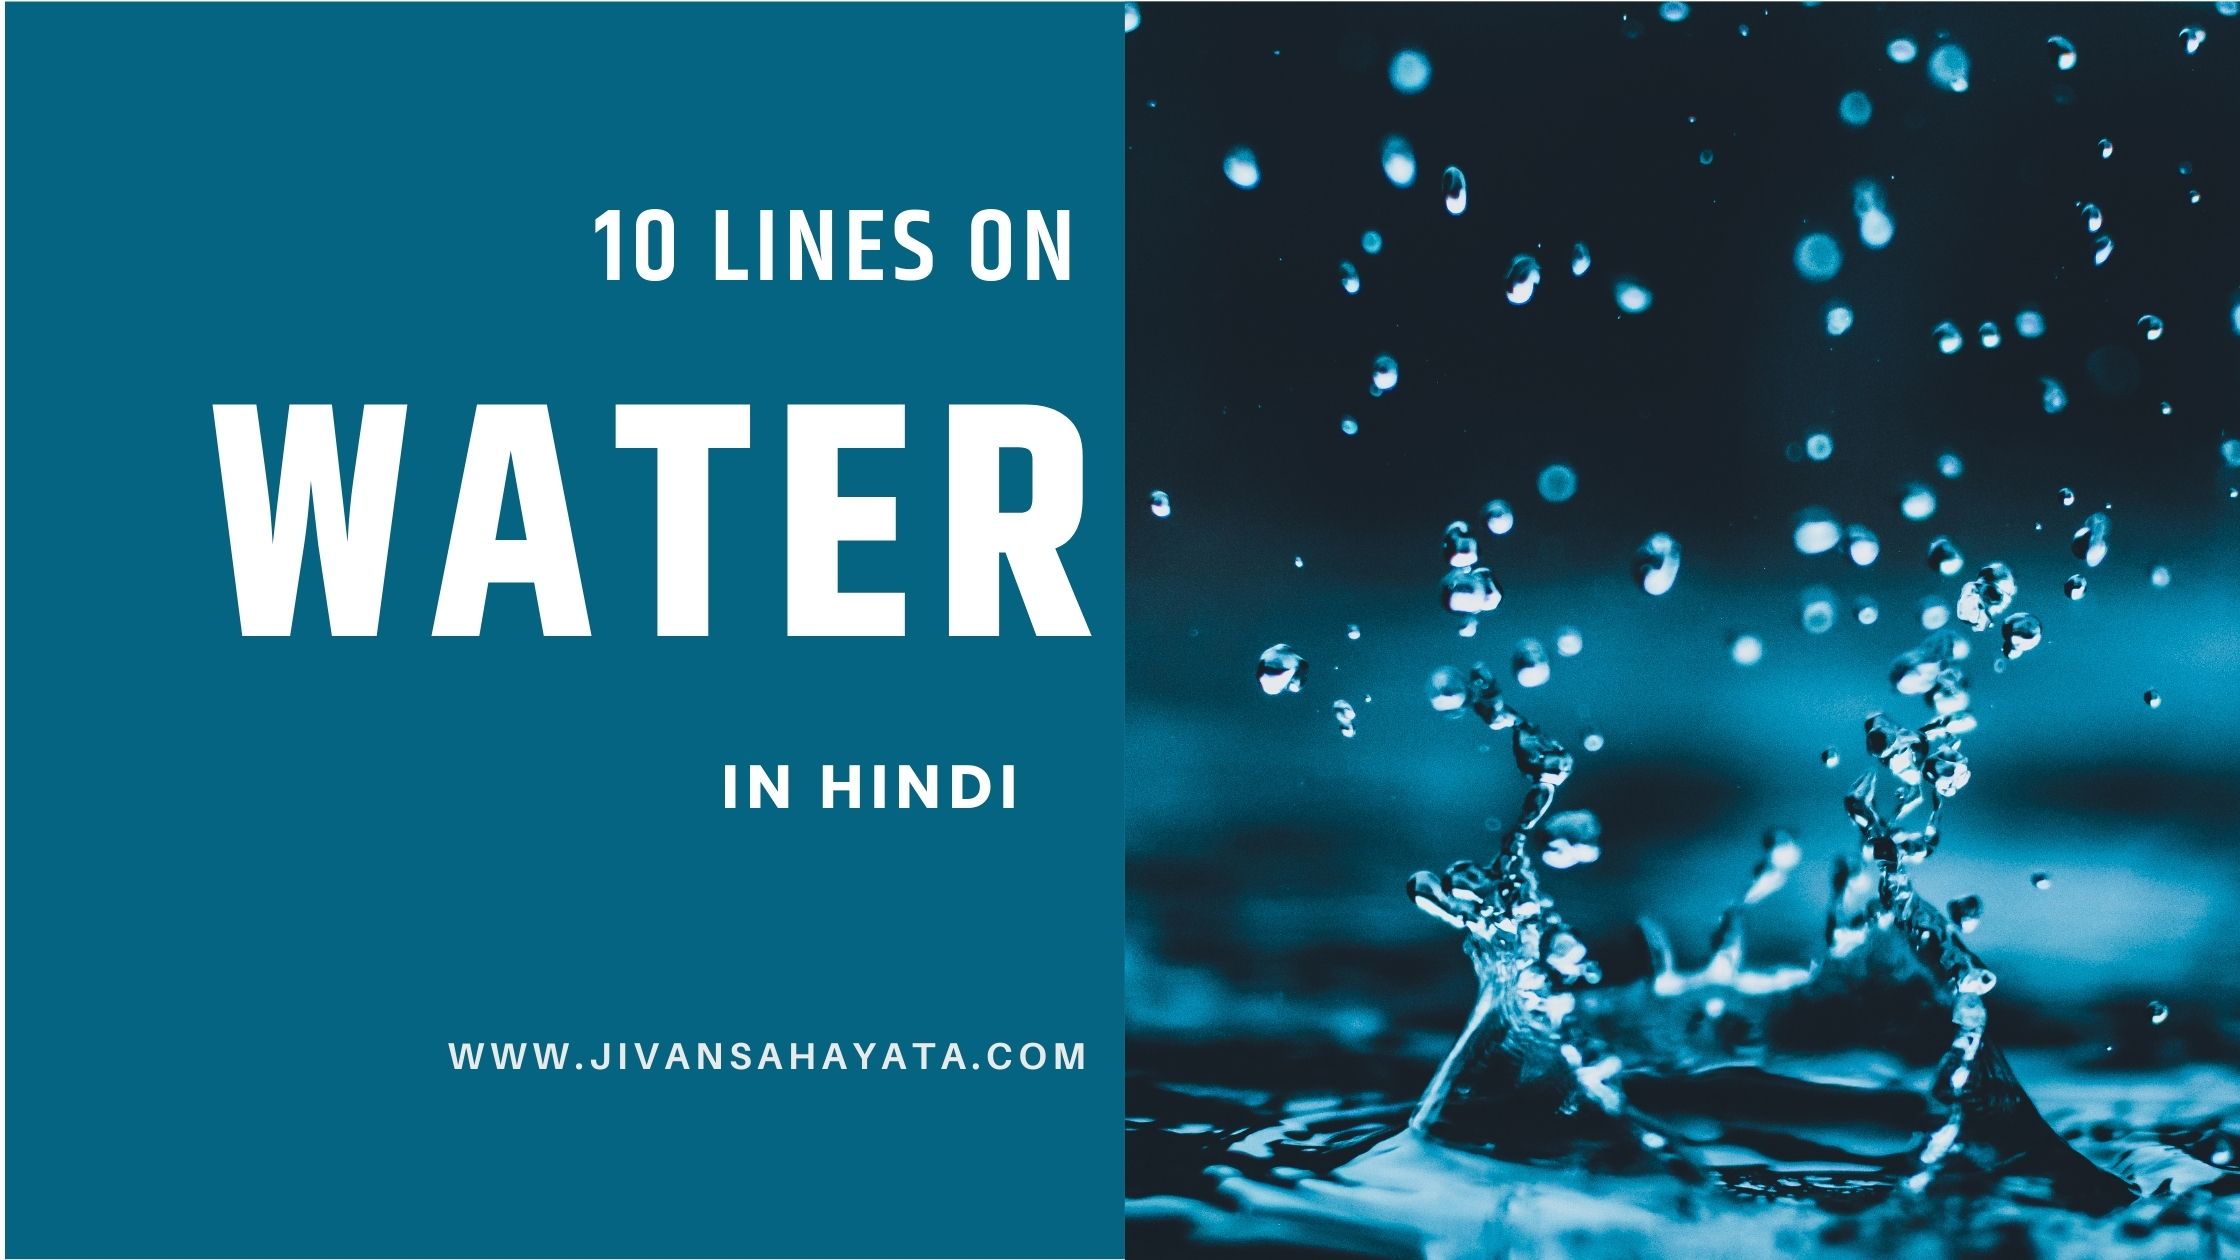 10 Lines on Water in Hindi।जल पर 10 लाइन